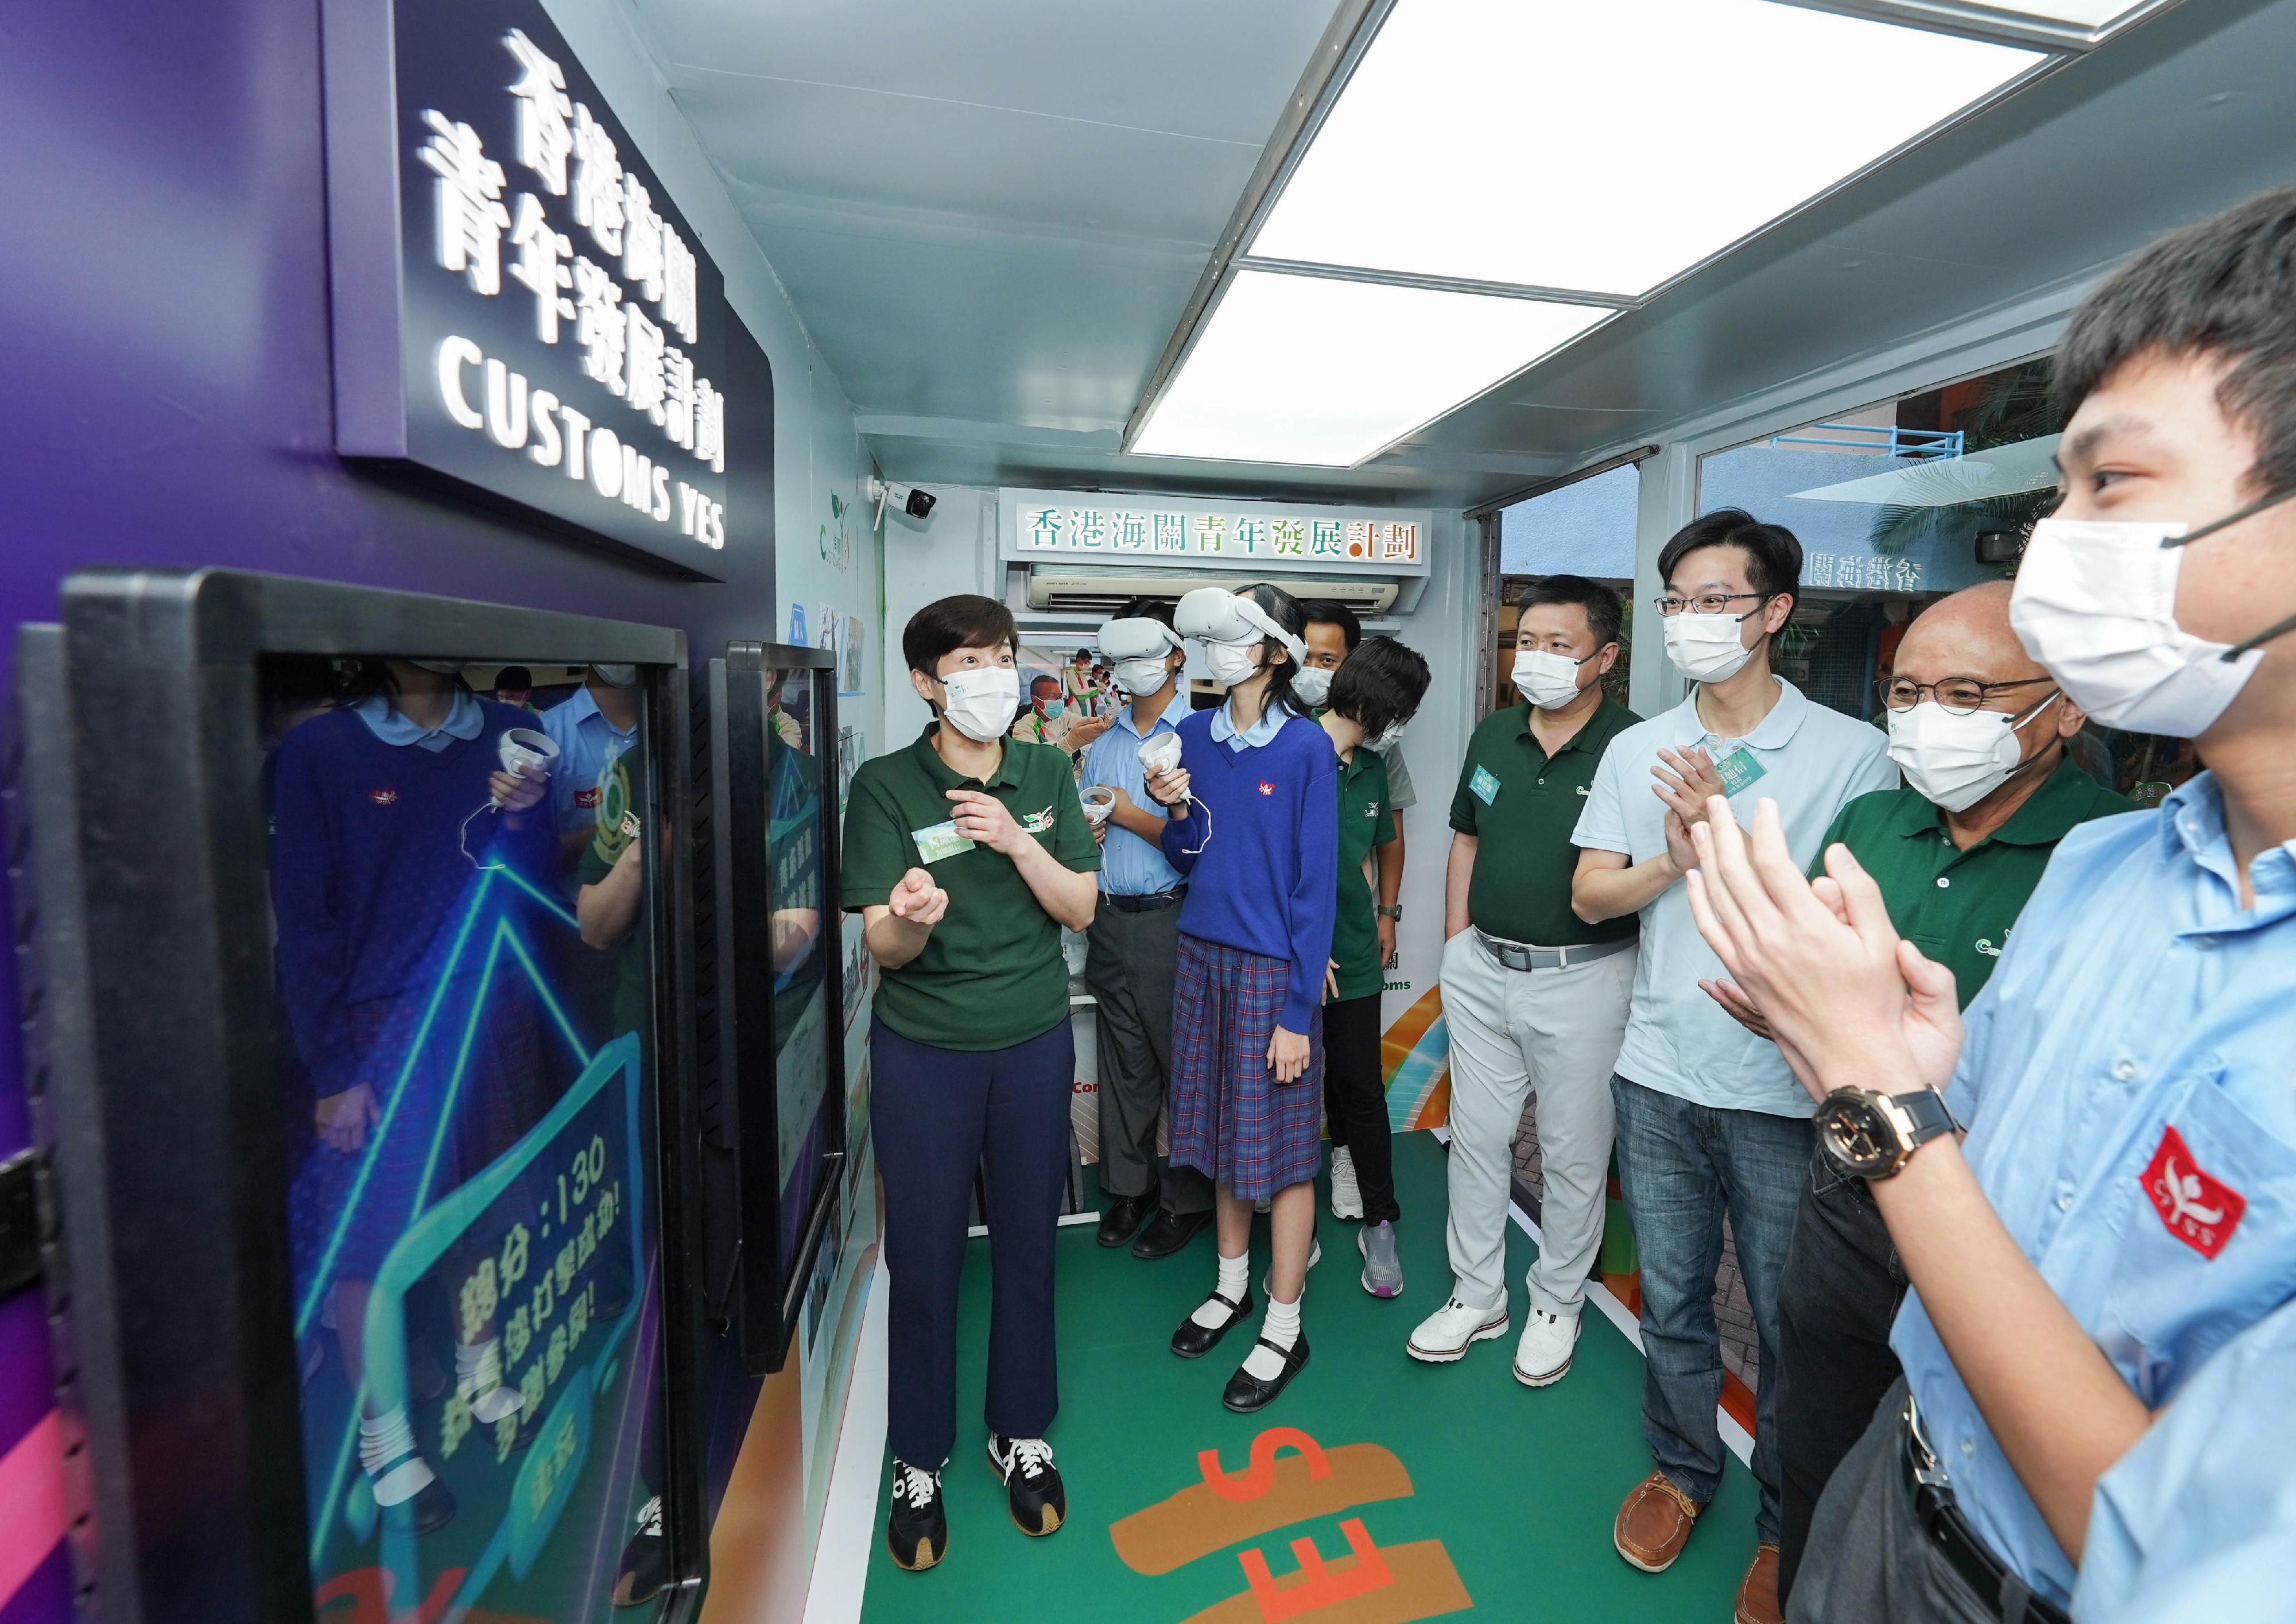 Hong Kong Customs today (October 26) held the kick-off ceremony for the "Customs YES Promotion Vehicle" at the Chinese Foundation Secondary School, signaling that the department spares no effort in strengthening youth work and deepening young people's understanding of the work of Customs. Photo shows the Commissioner of Customs and Excise, Ms Louise Ho (first left), touring the promotion vehicle together with some students.